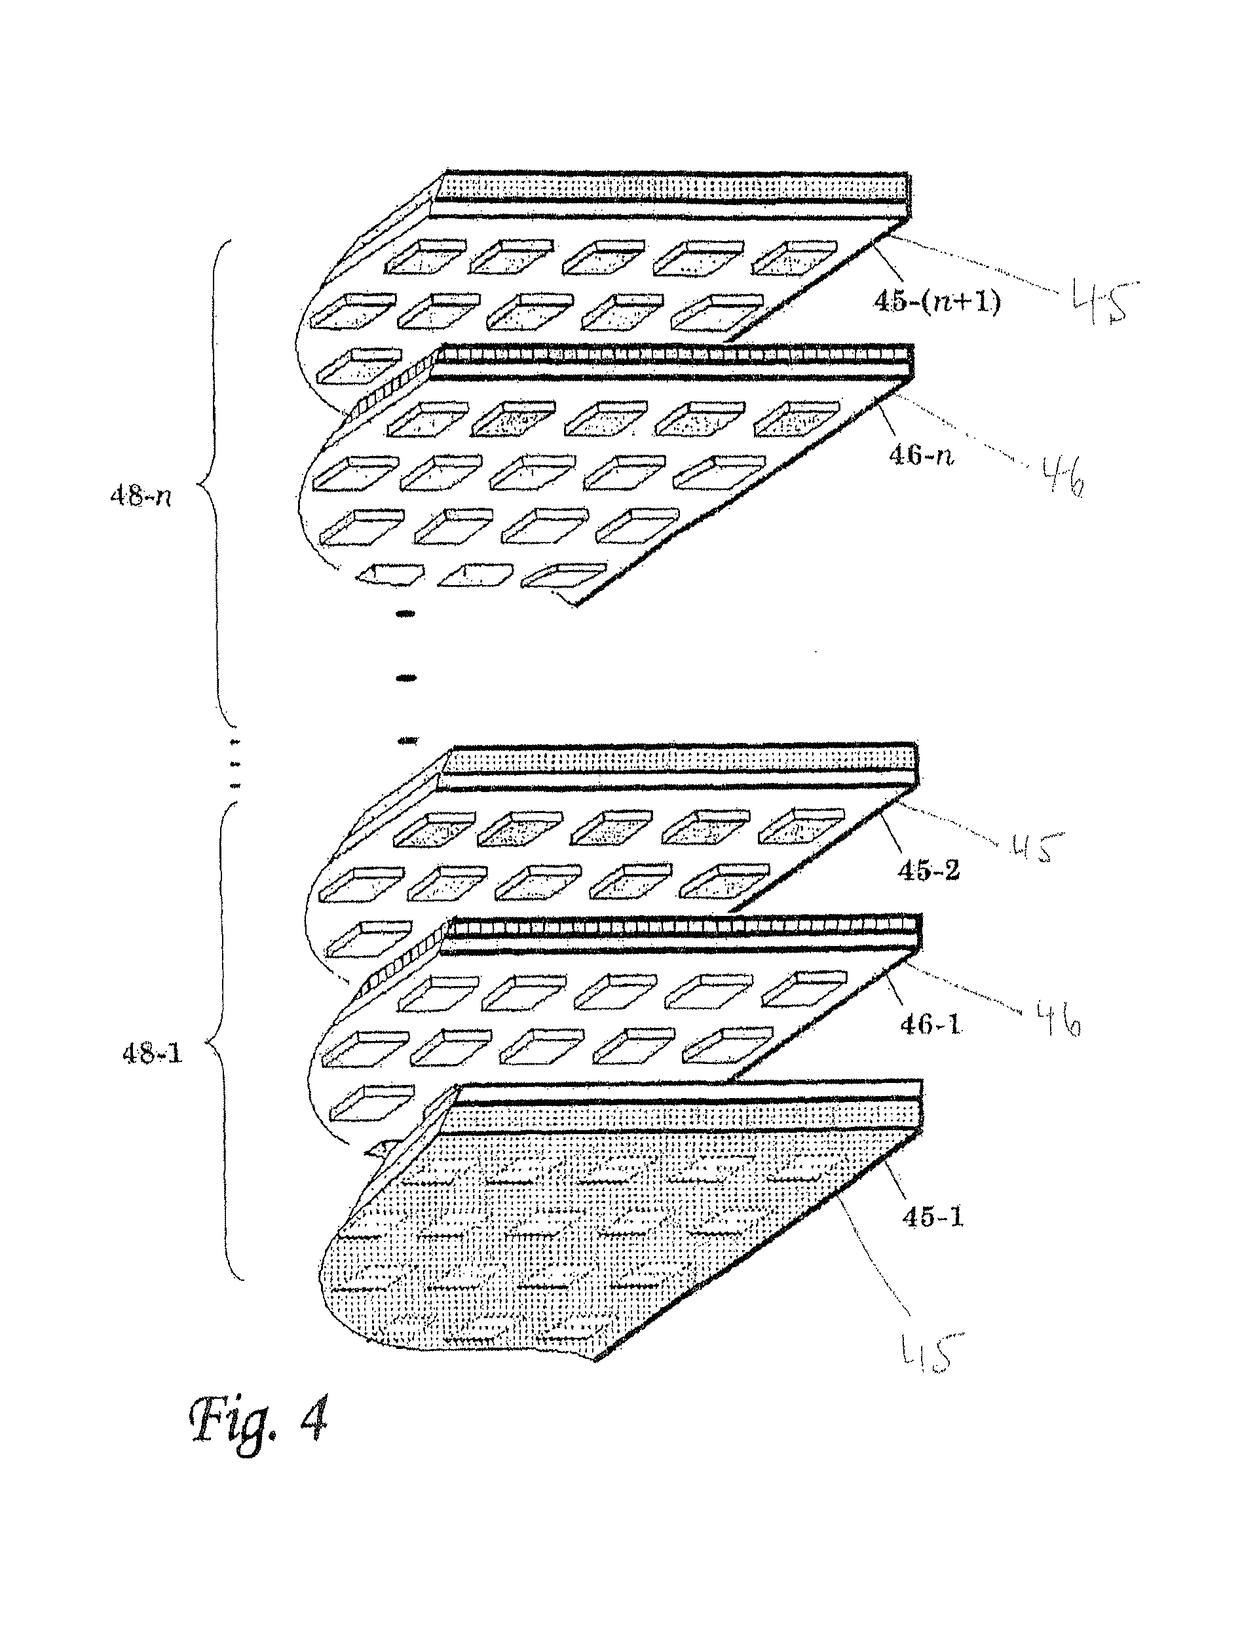 Multilayered electrochemical energy storage device and method of manufacture thereof